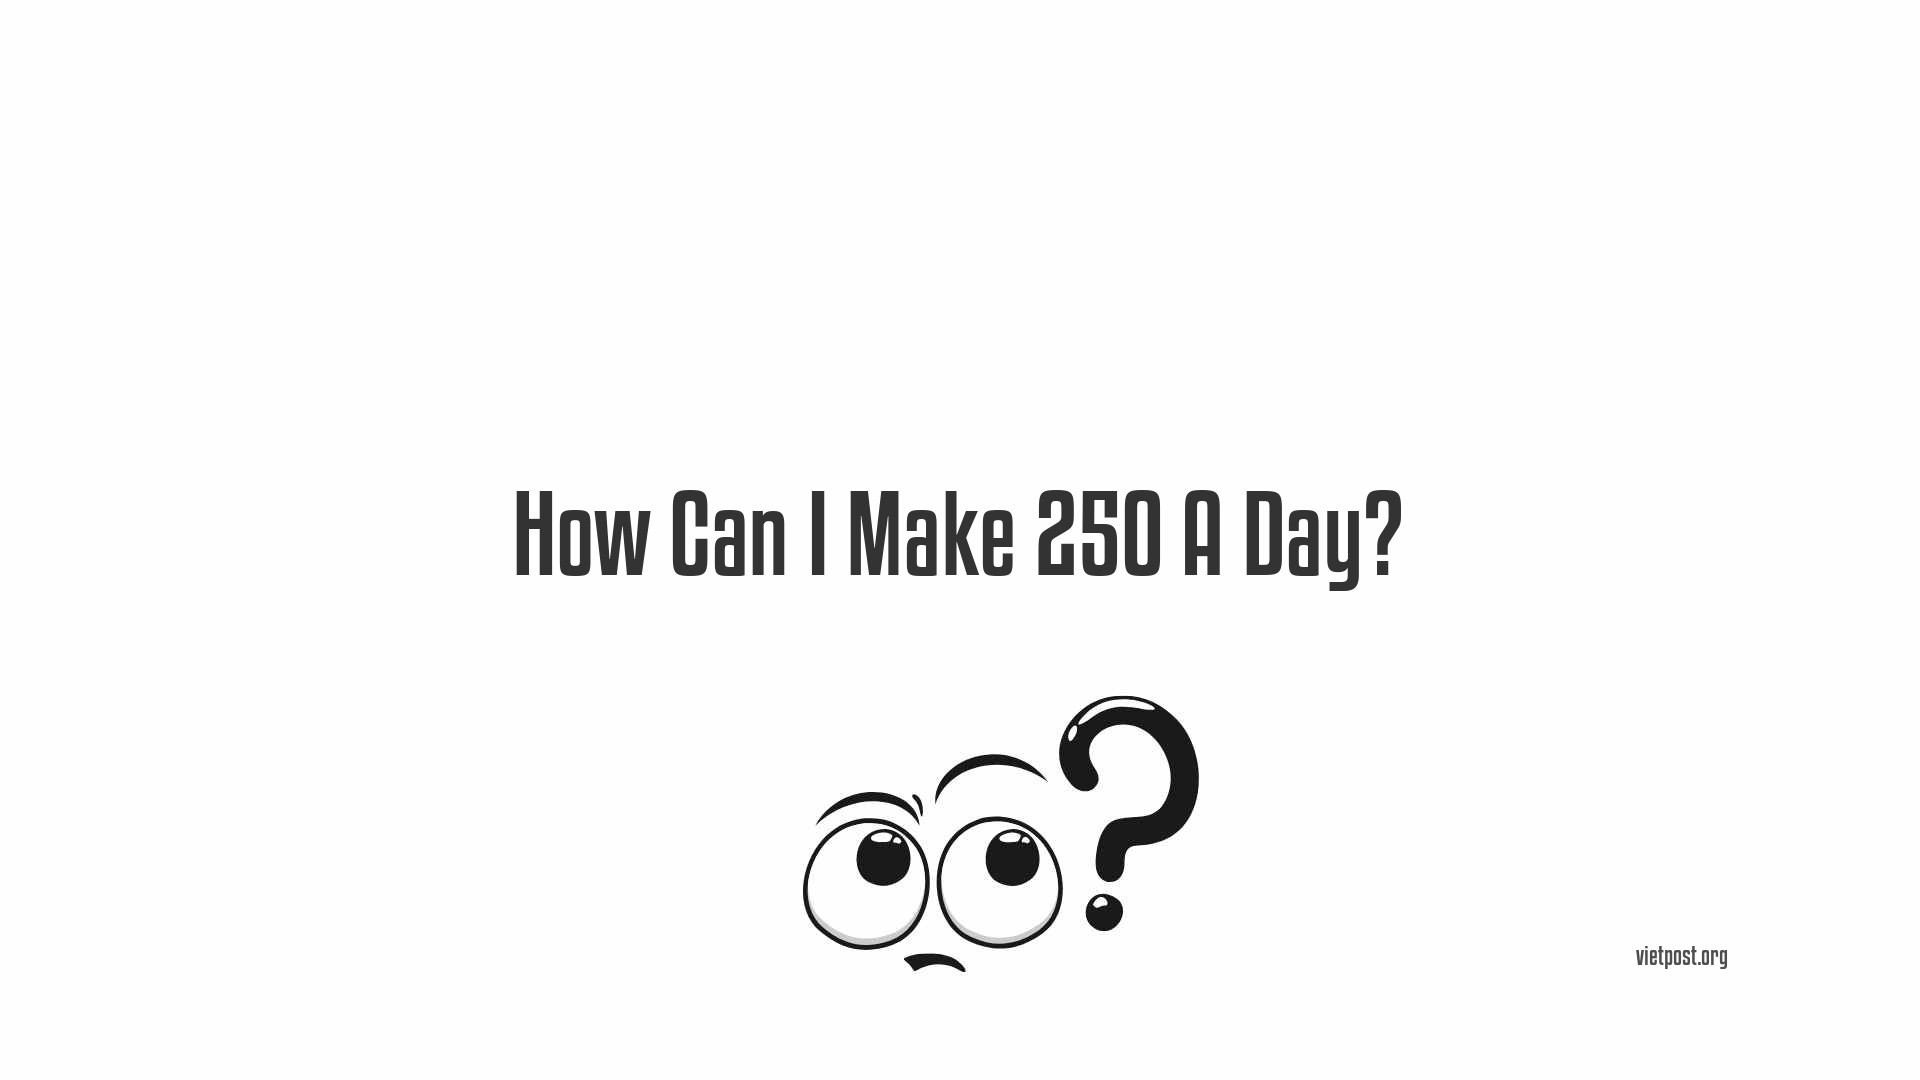 How Can I Make 250 A Day?